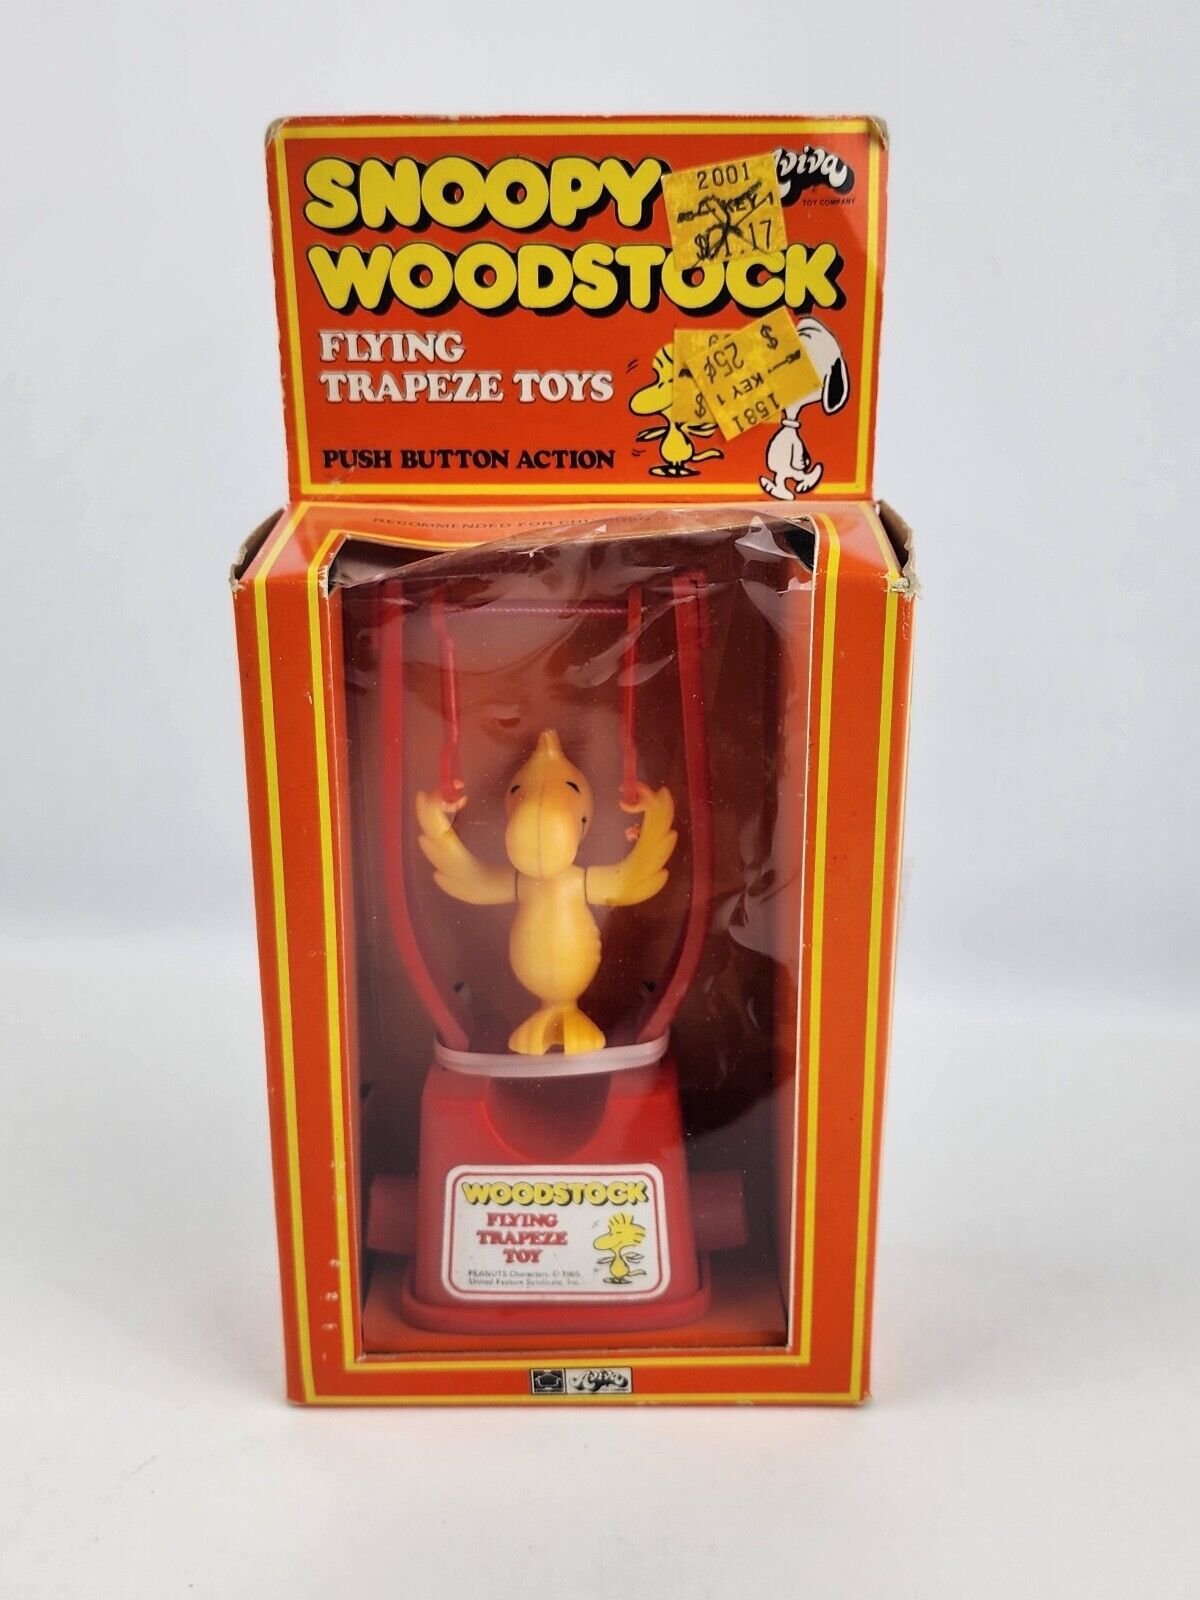 Vintage Snoopy Woodstock Flying Trapeze Toy 6" New in box Aviva 1970's - $51.47